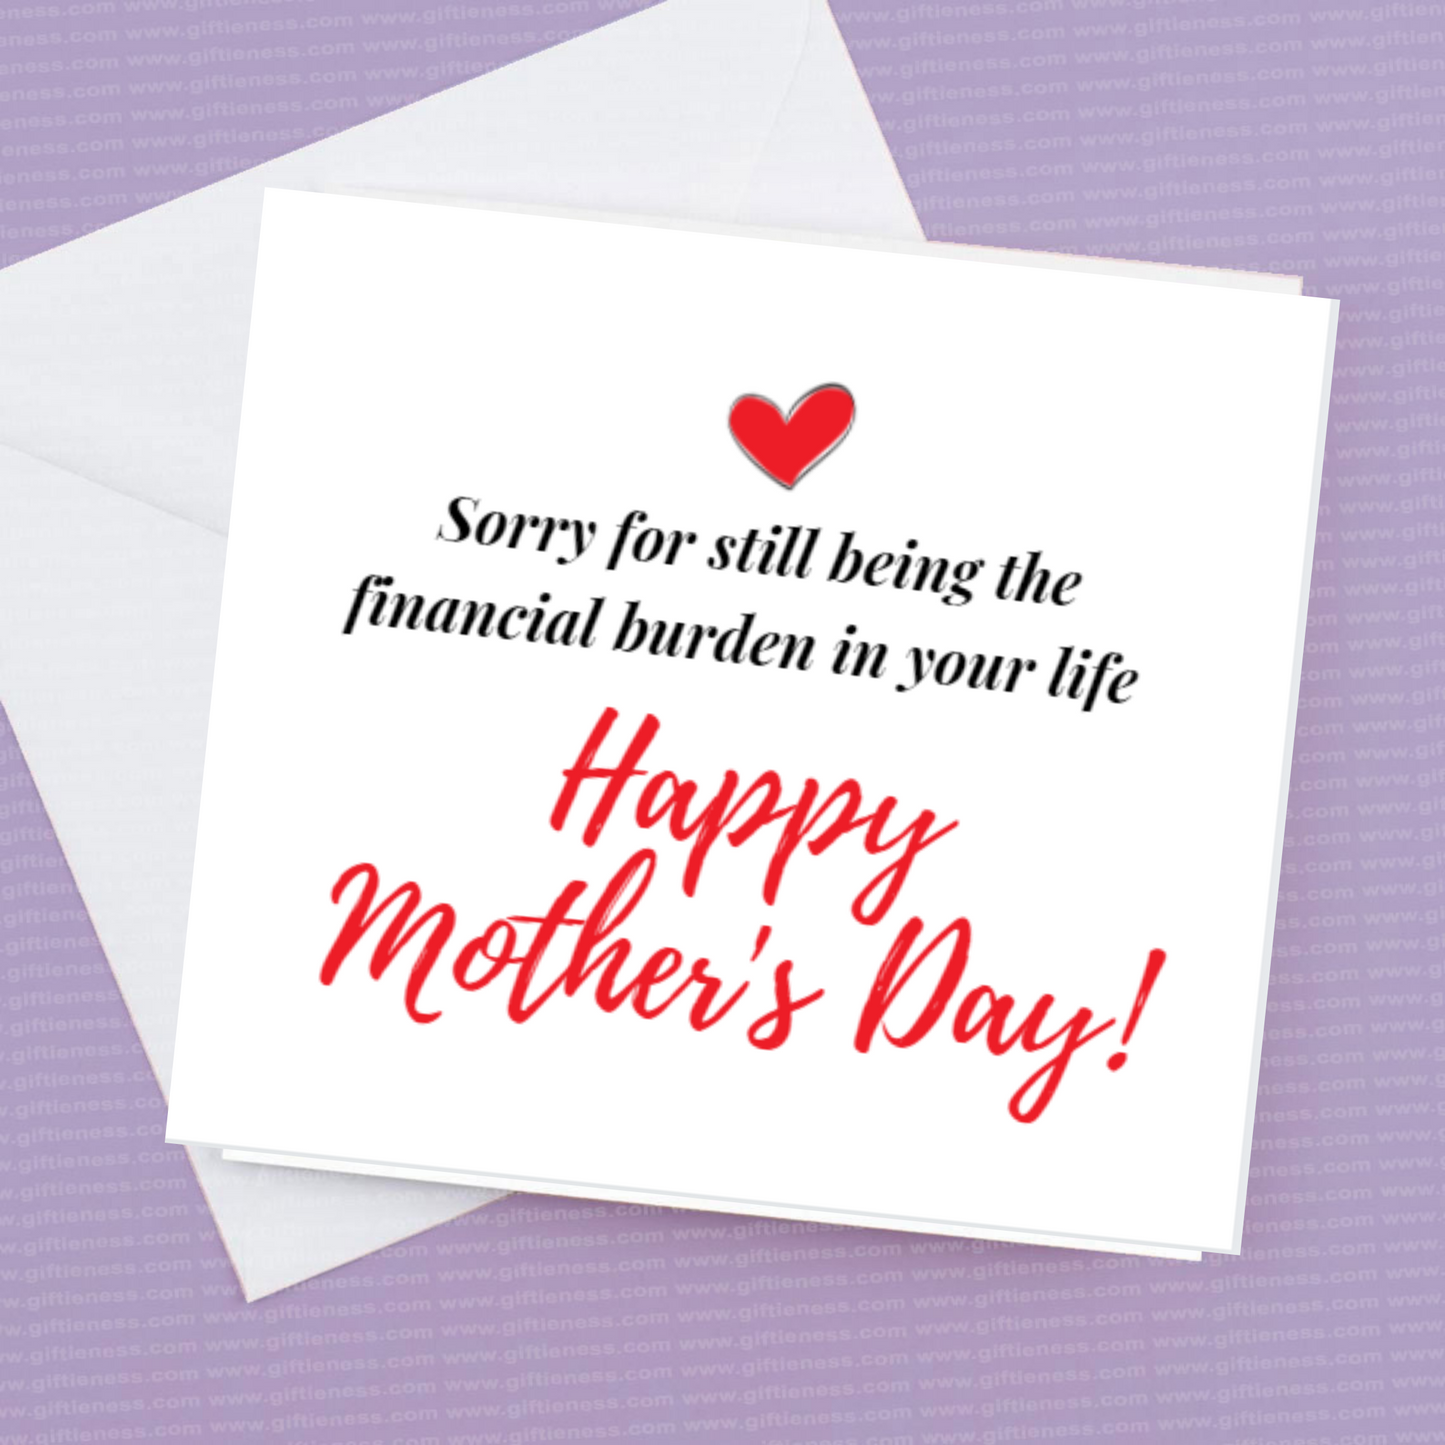 Sorry for still being the financial burden in your life - Happy Mothers day